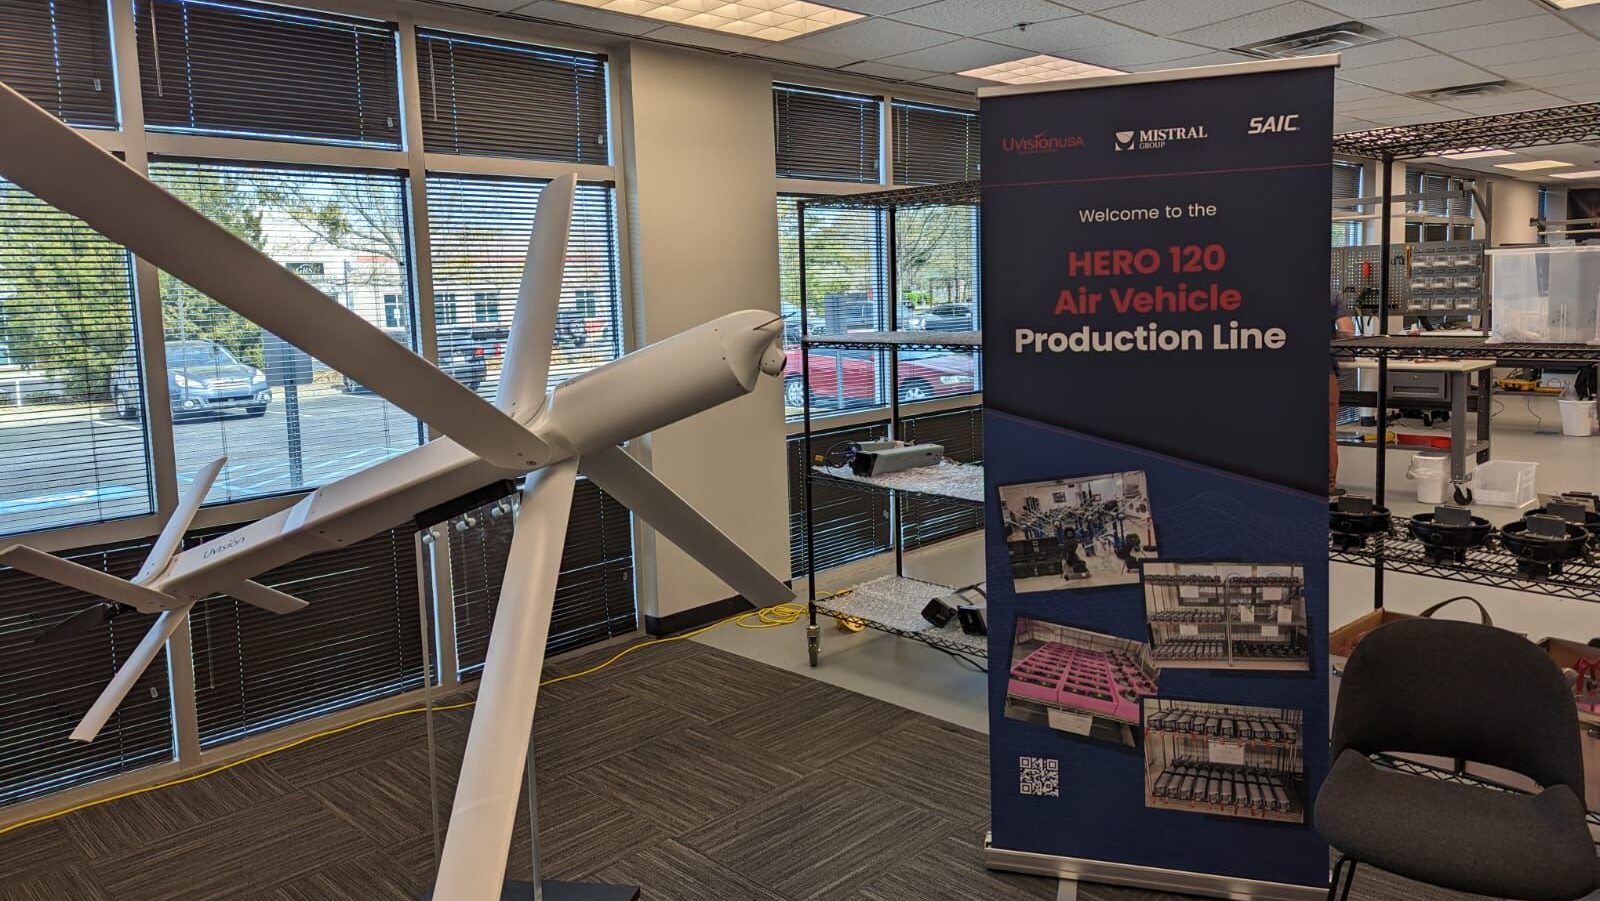 Loitering munition maker UVision contracts with SAIC for US production line